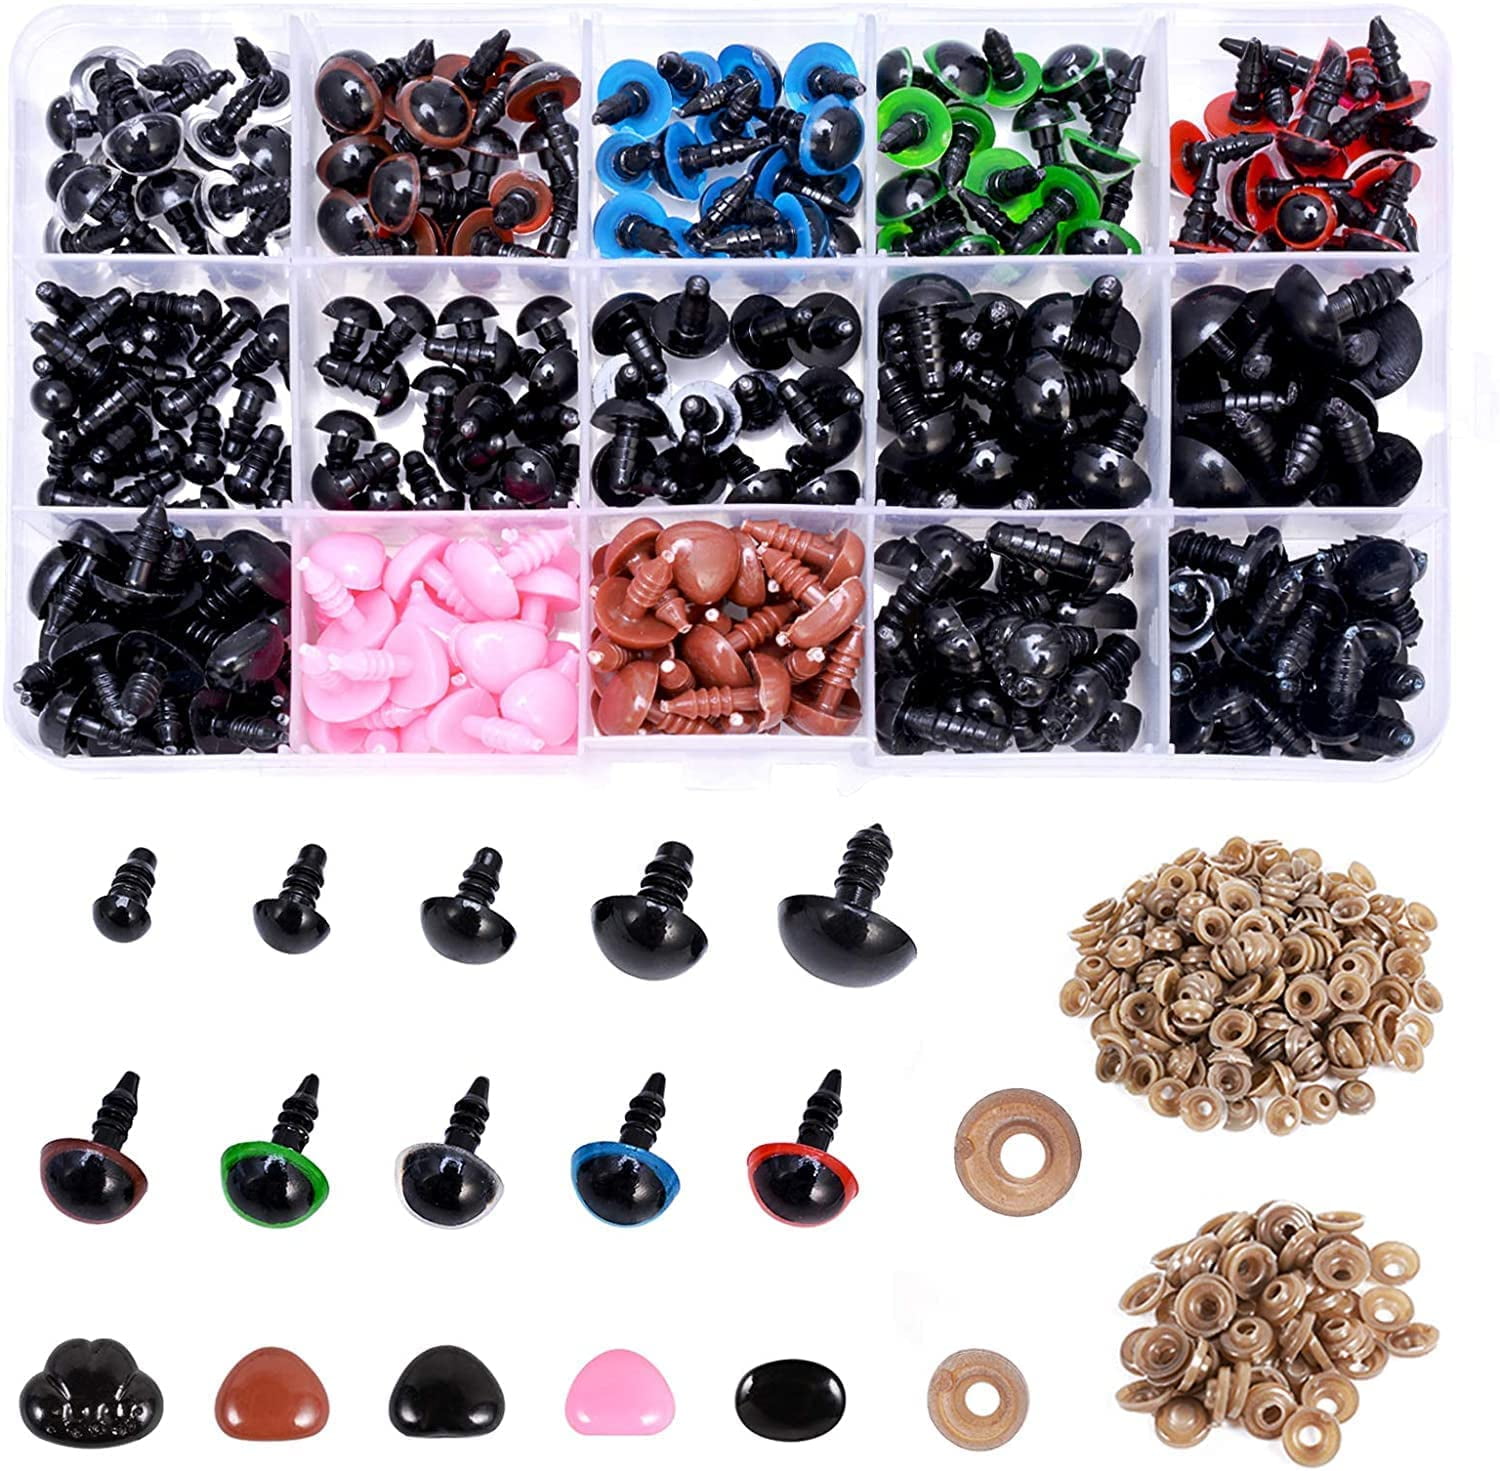 180pcs/Set Large Safety Eyes And Noses For Amigurumi, 16-30mm Plastic Black  Eyes With Washers For Crochet Animals, Puppet, Stuffed Animal And Teddy Be